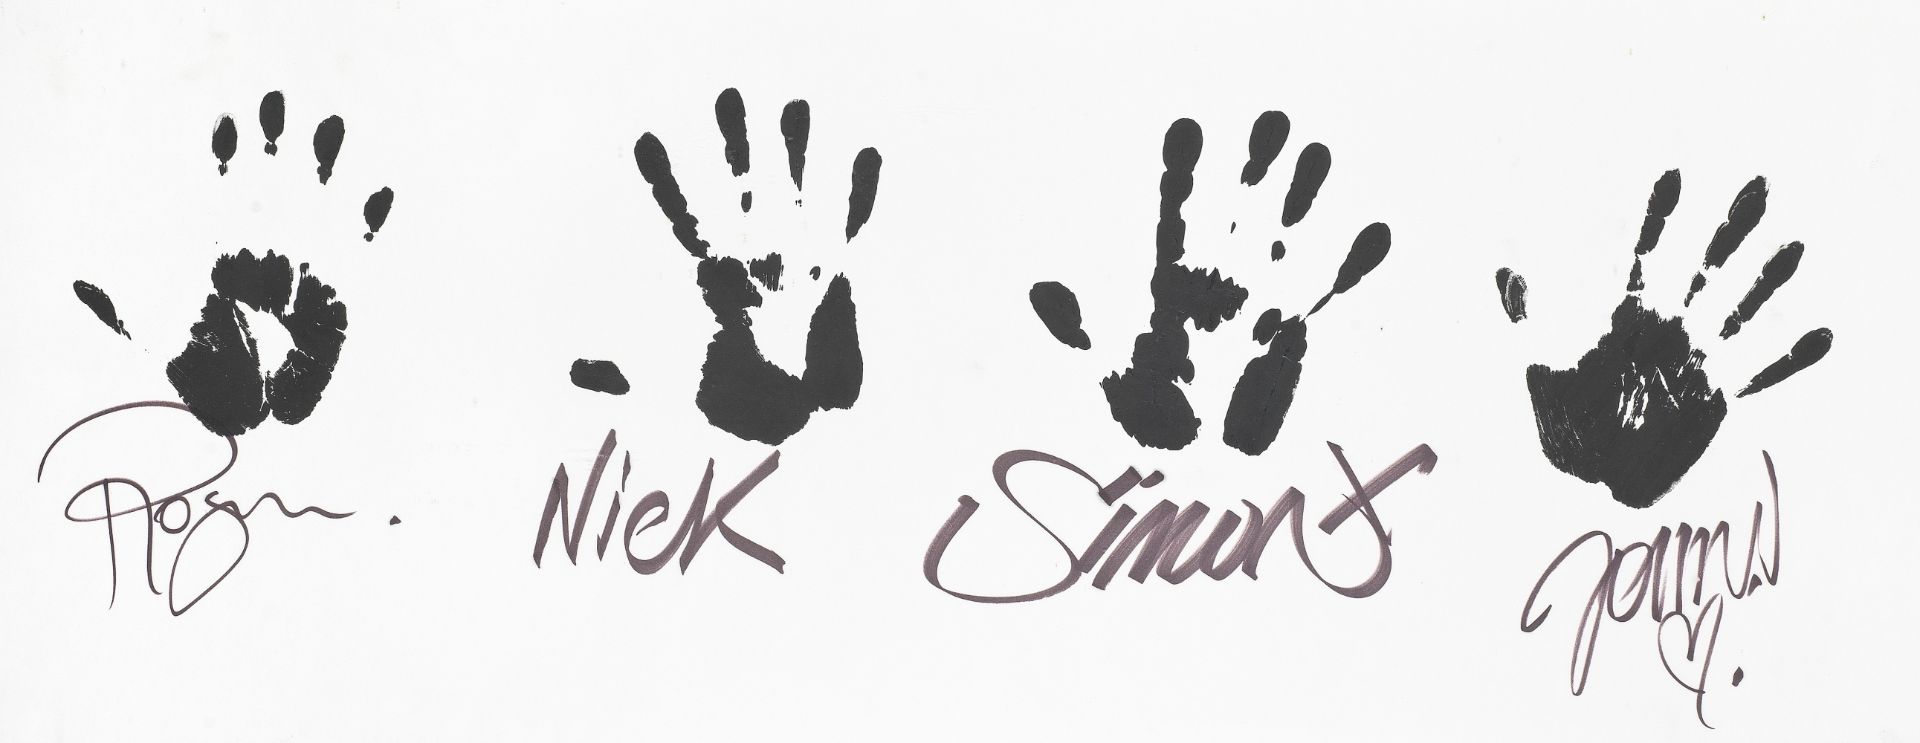 Duran Duran: A Set Of Handprints By The Band,